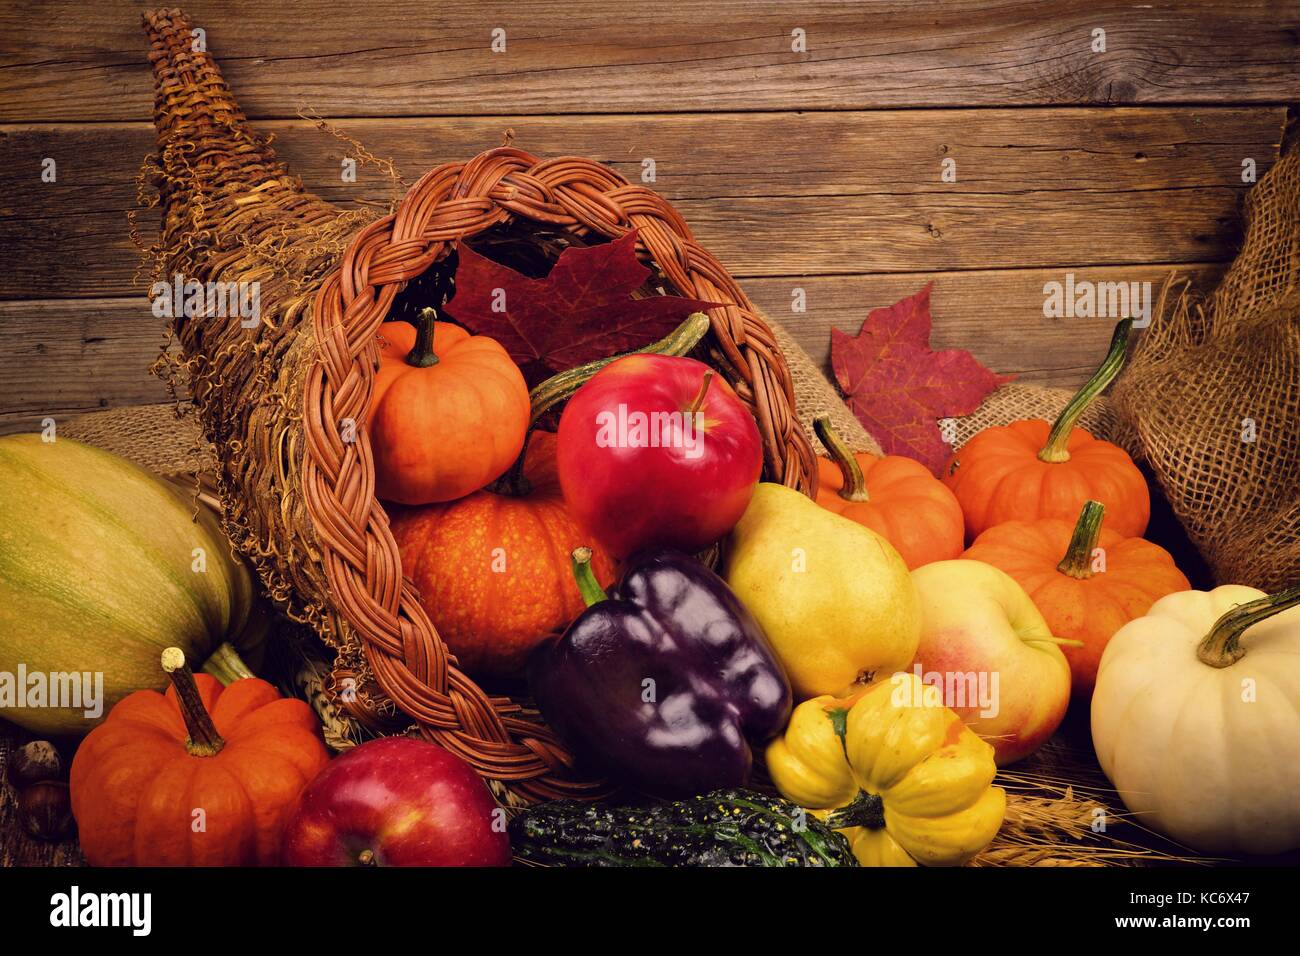 Thanksgiving cornucopia close up against a rustic wooden background Stock Photo